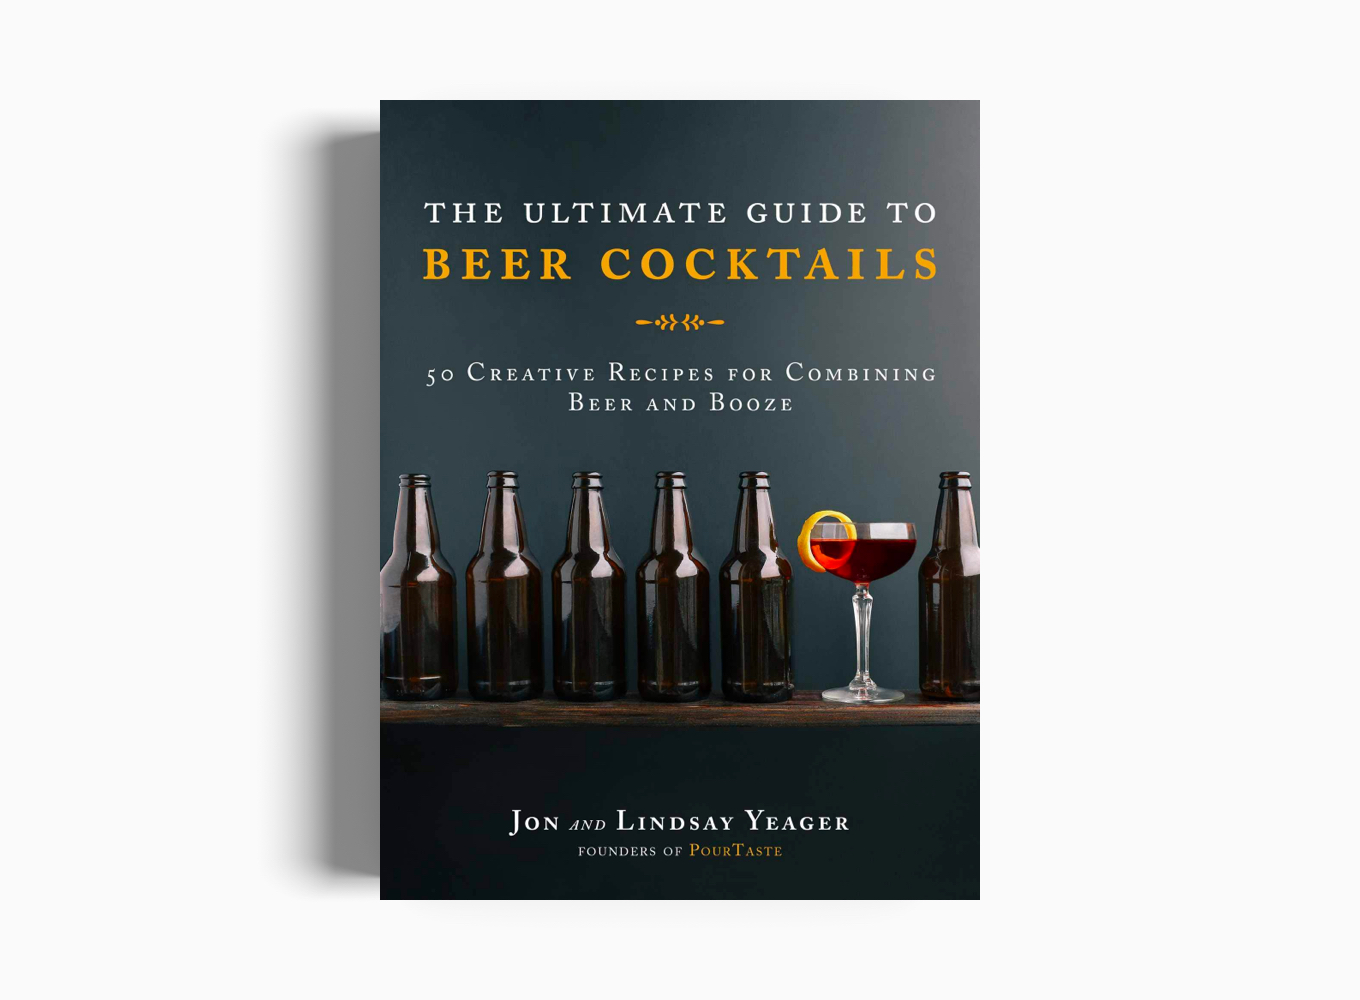 THE ULTIMATE GUIDE TO BEER COCKTAILS